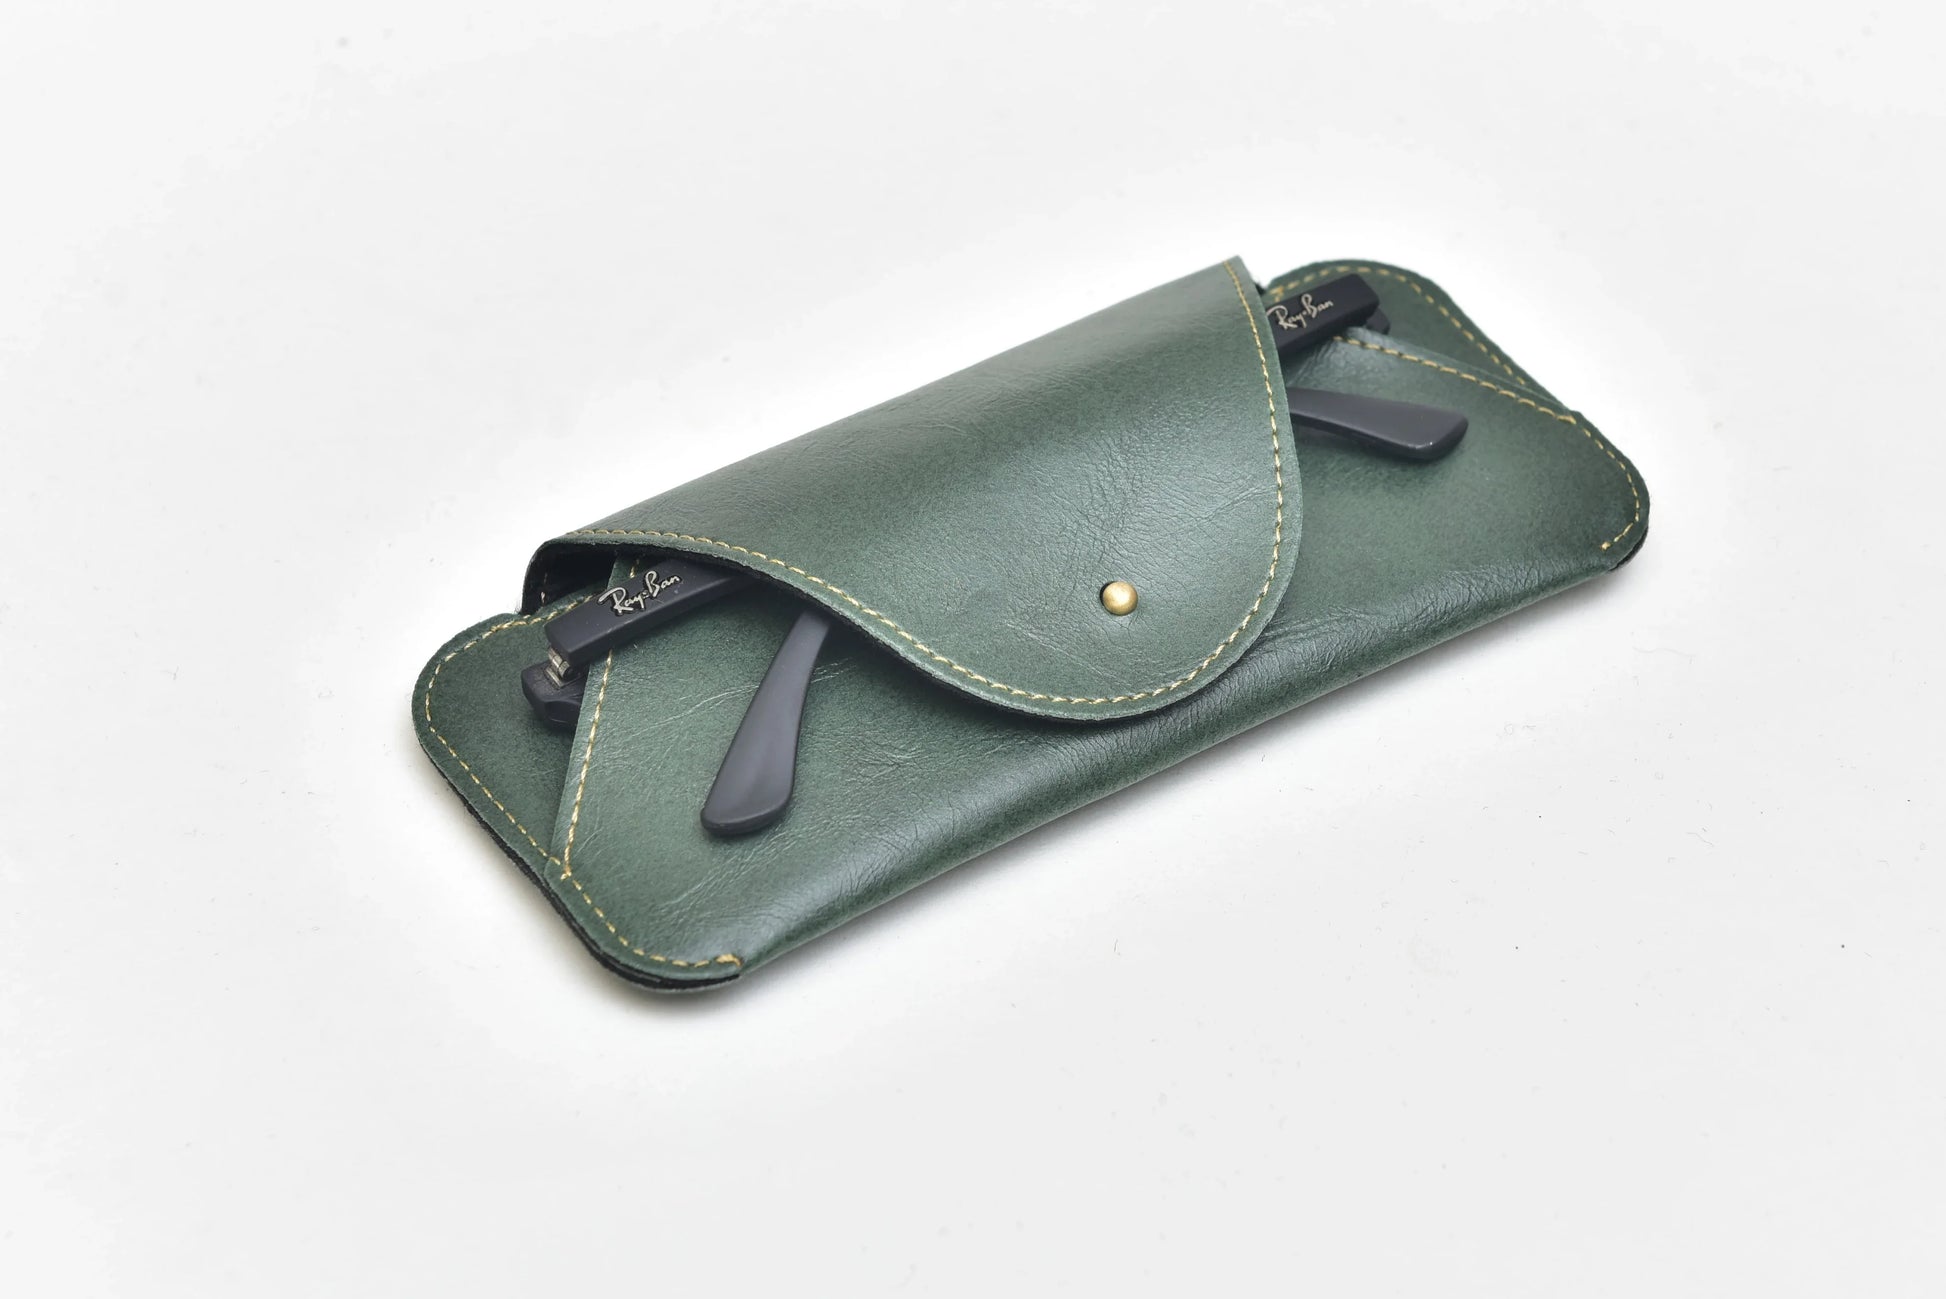 Keep your eyewear secure and stylish with this personalized case.